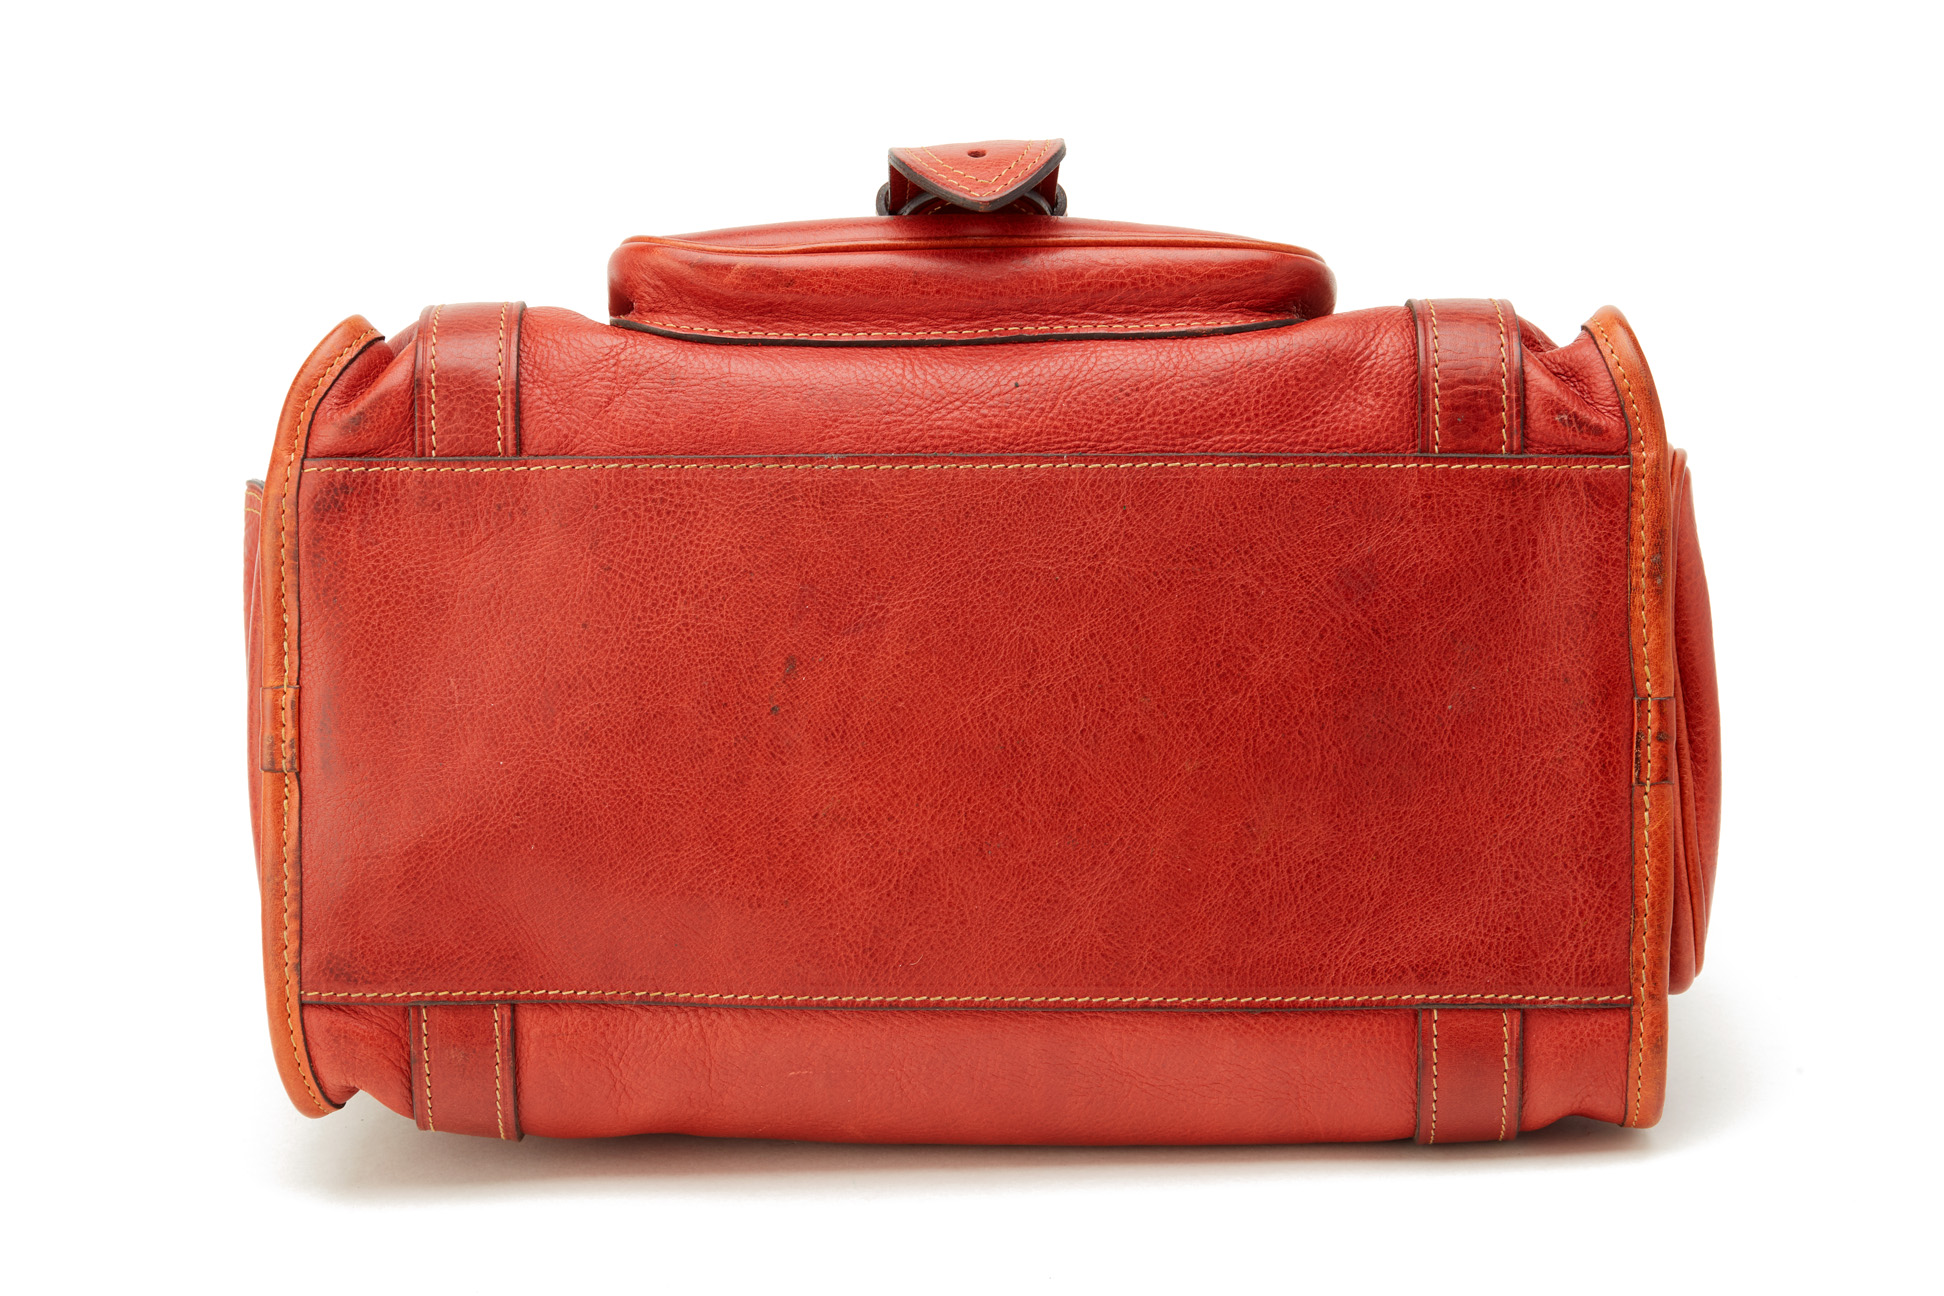 A MULBERRY OX BLOOD RED HANDBAG - Image 5 of 5